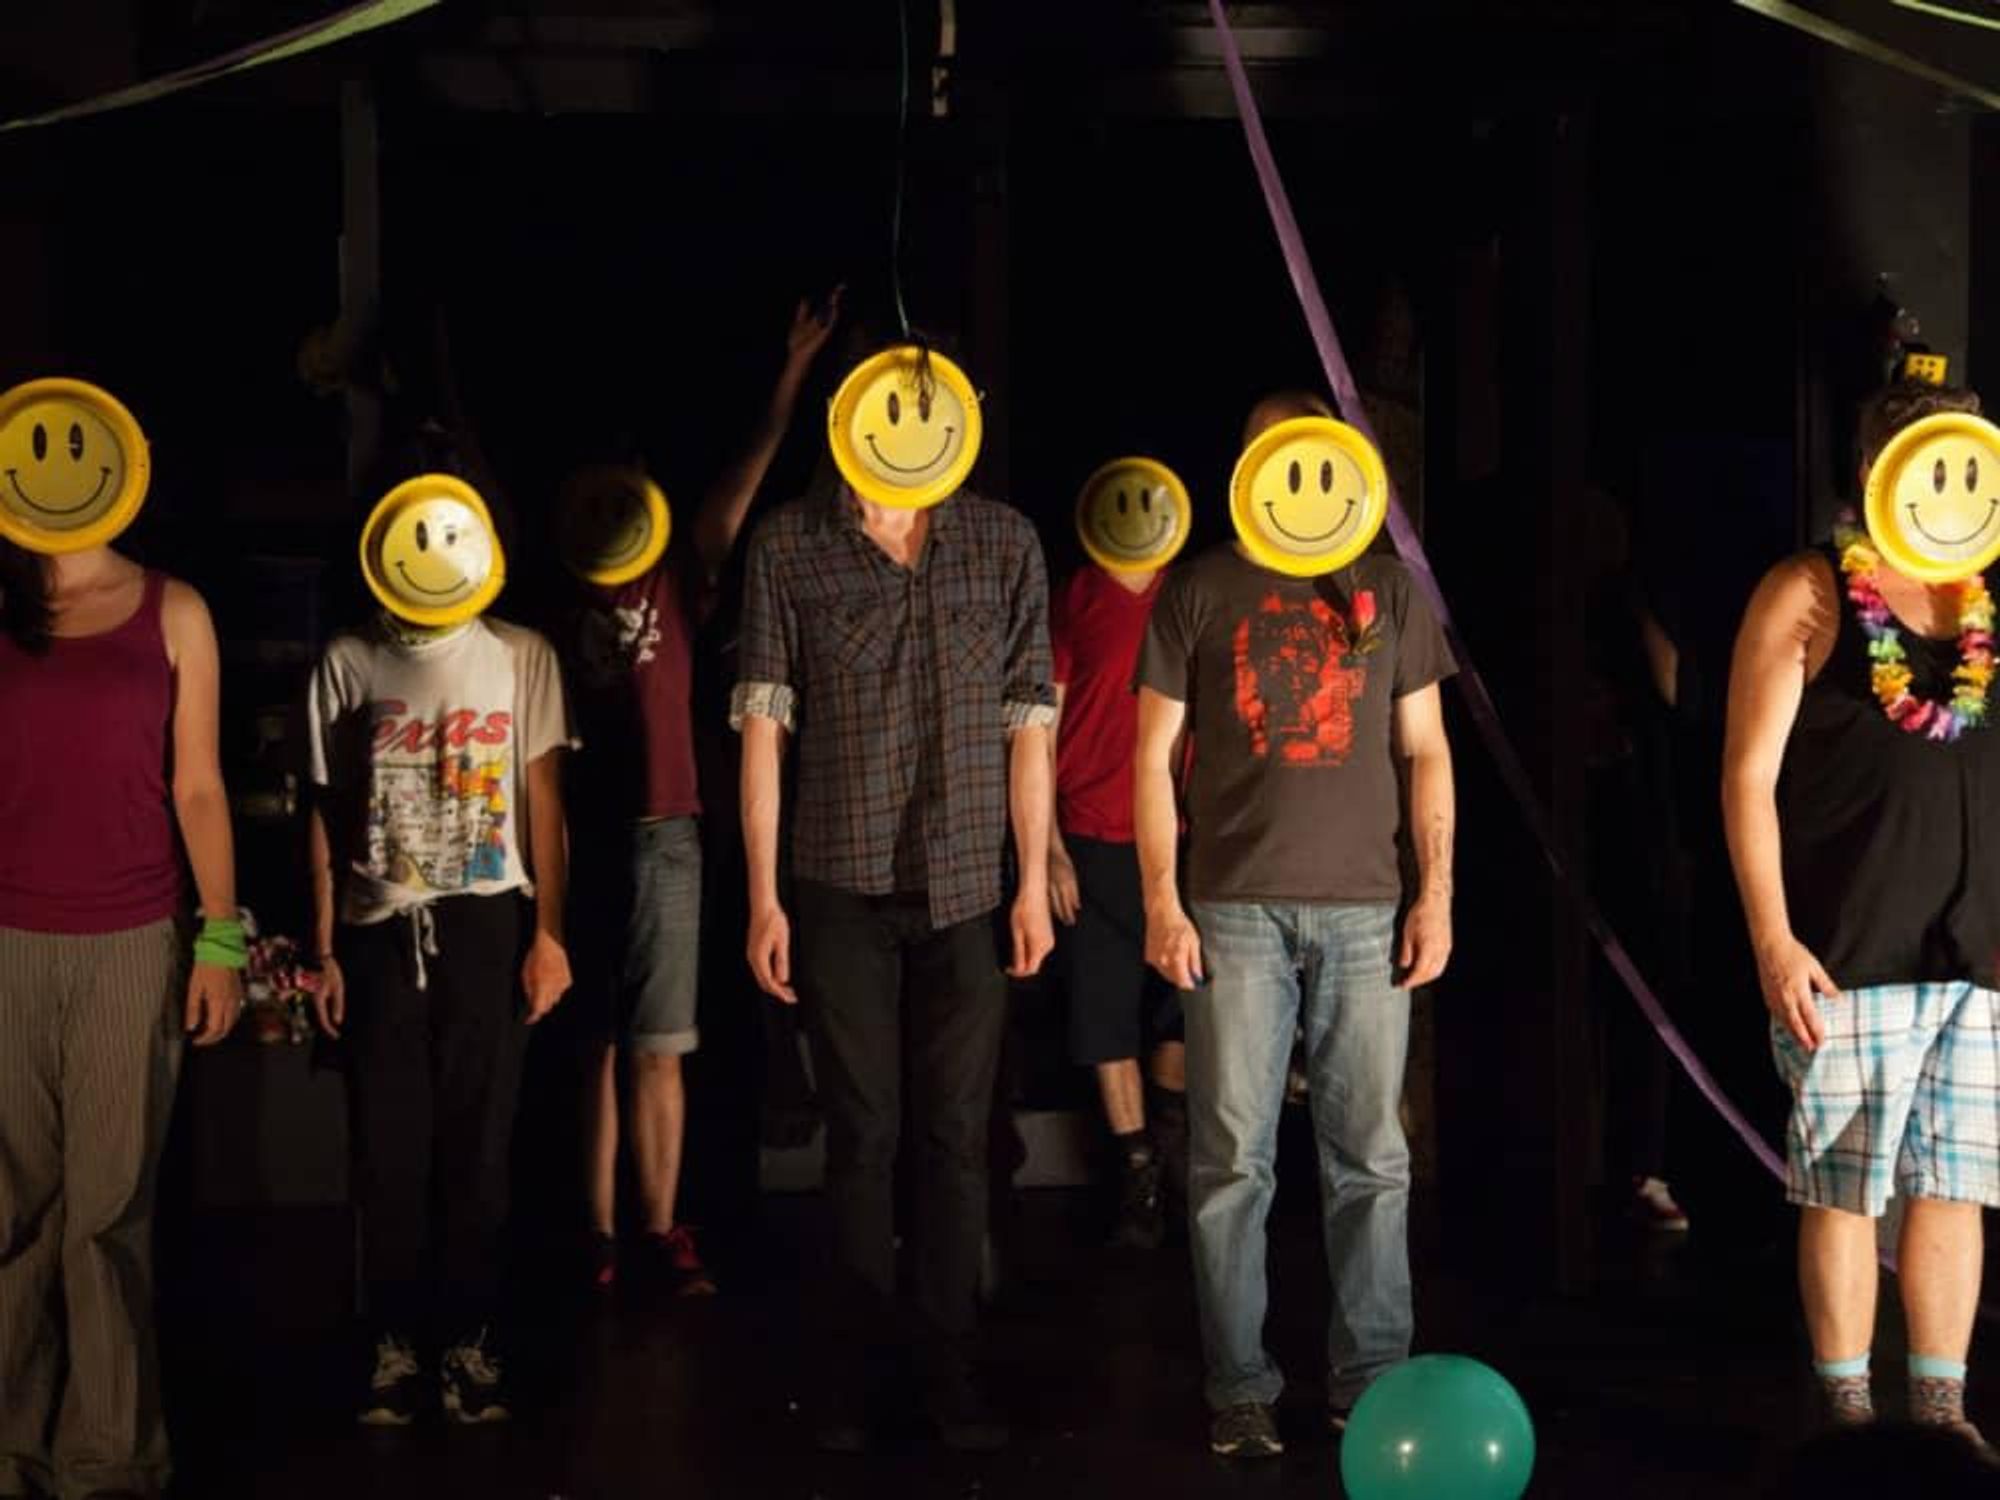 New York Neo-Futurists improv theater group smiley face 2015